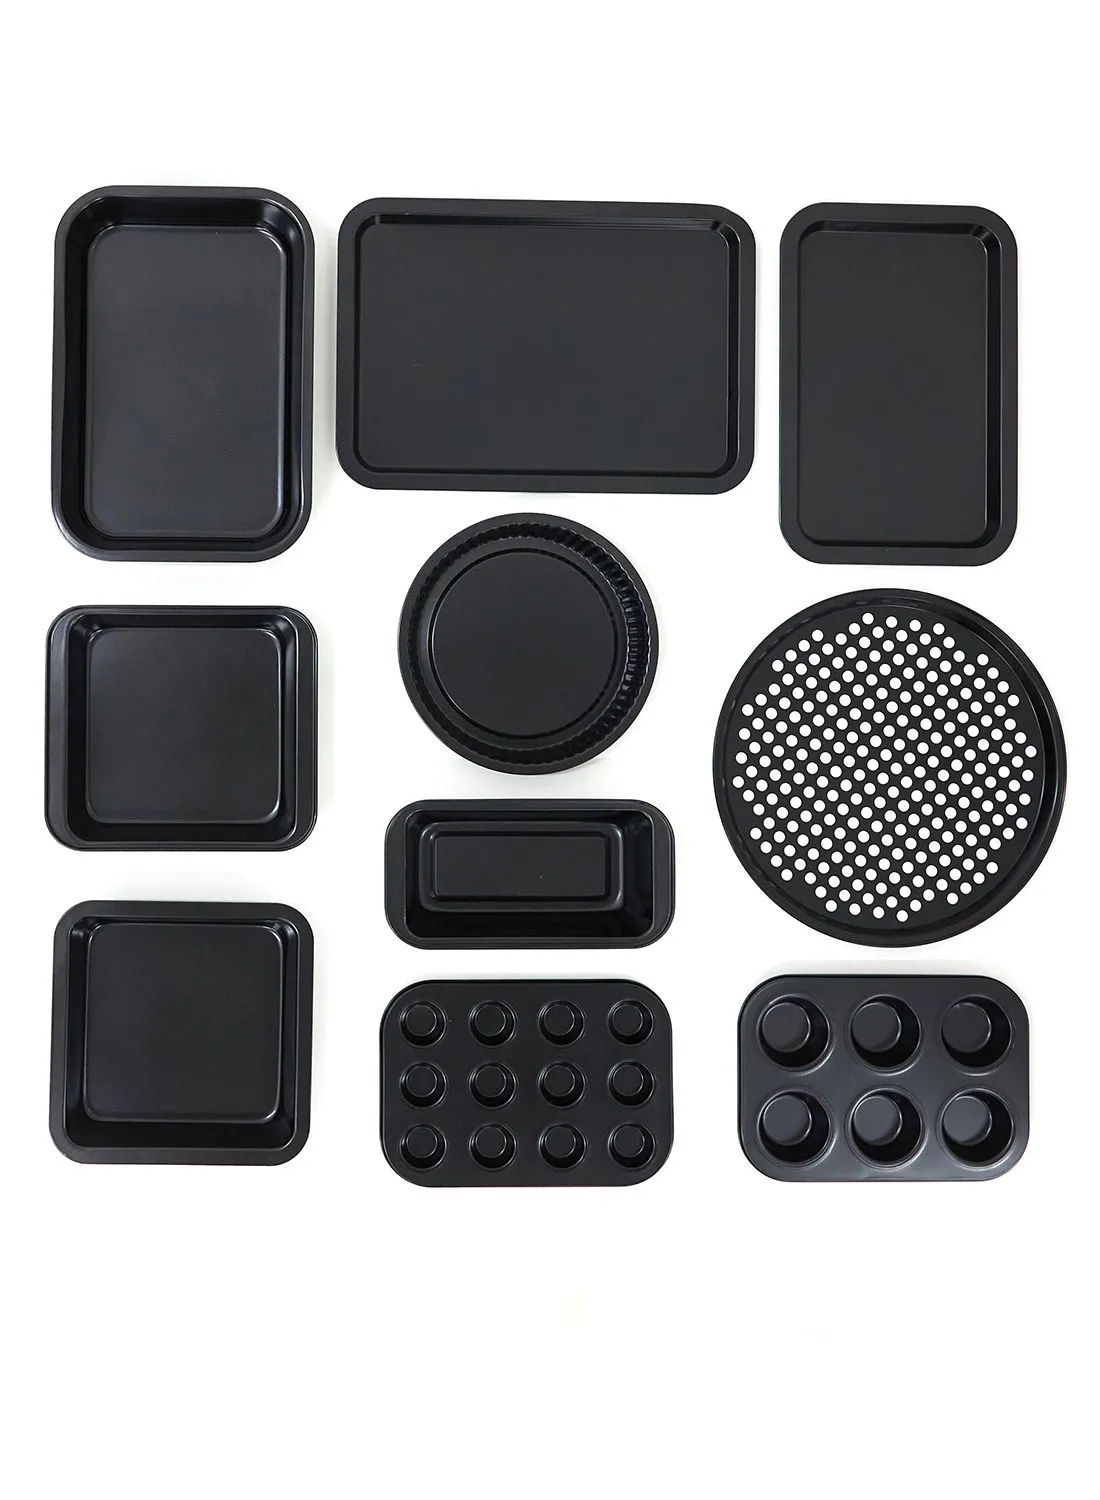 noon east 10 Piece Oven Pan Set - Made Of Carbon Steel - Baking Pan - Oven Trays - Cake Tray - Oven Pan - Cake Mold - Black